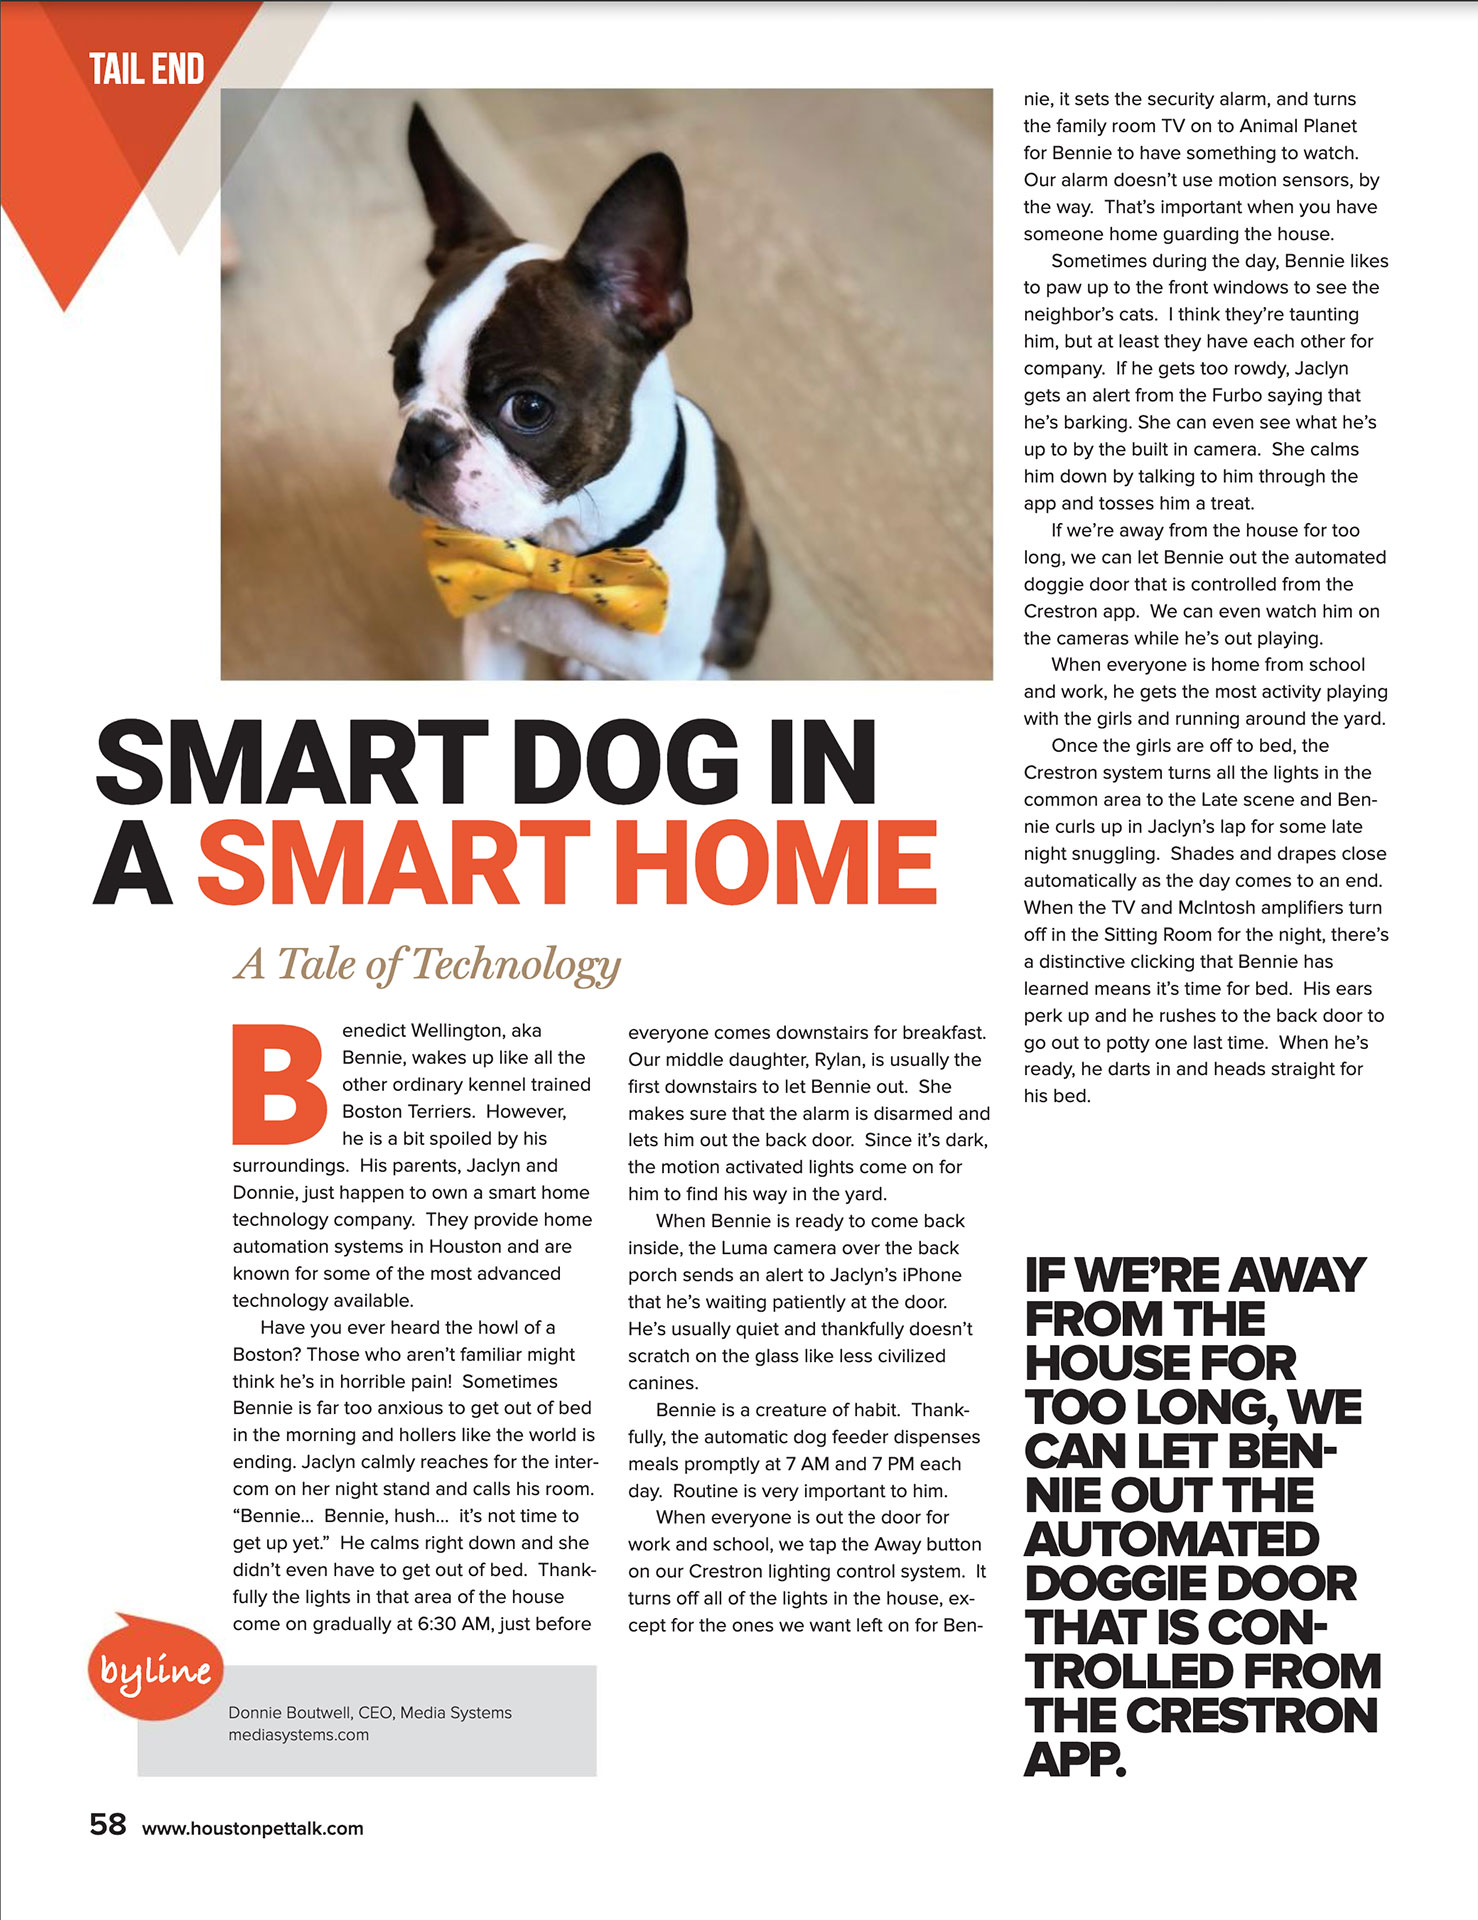 Smart Dog in a Smart Home - A Tale of Technology